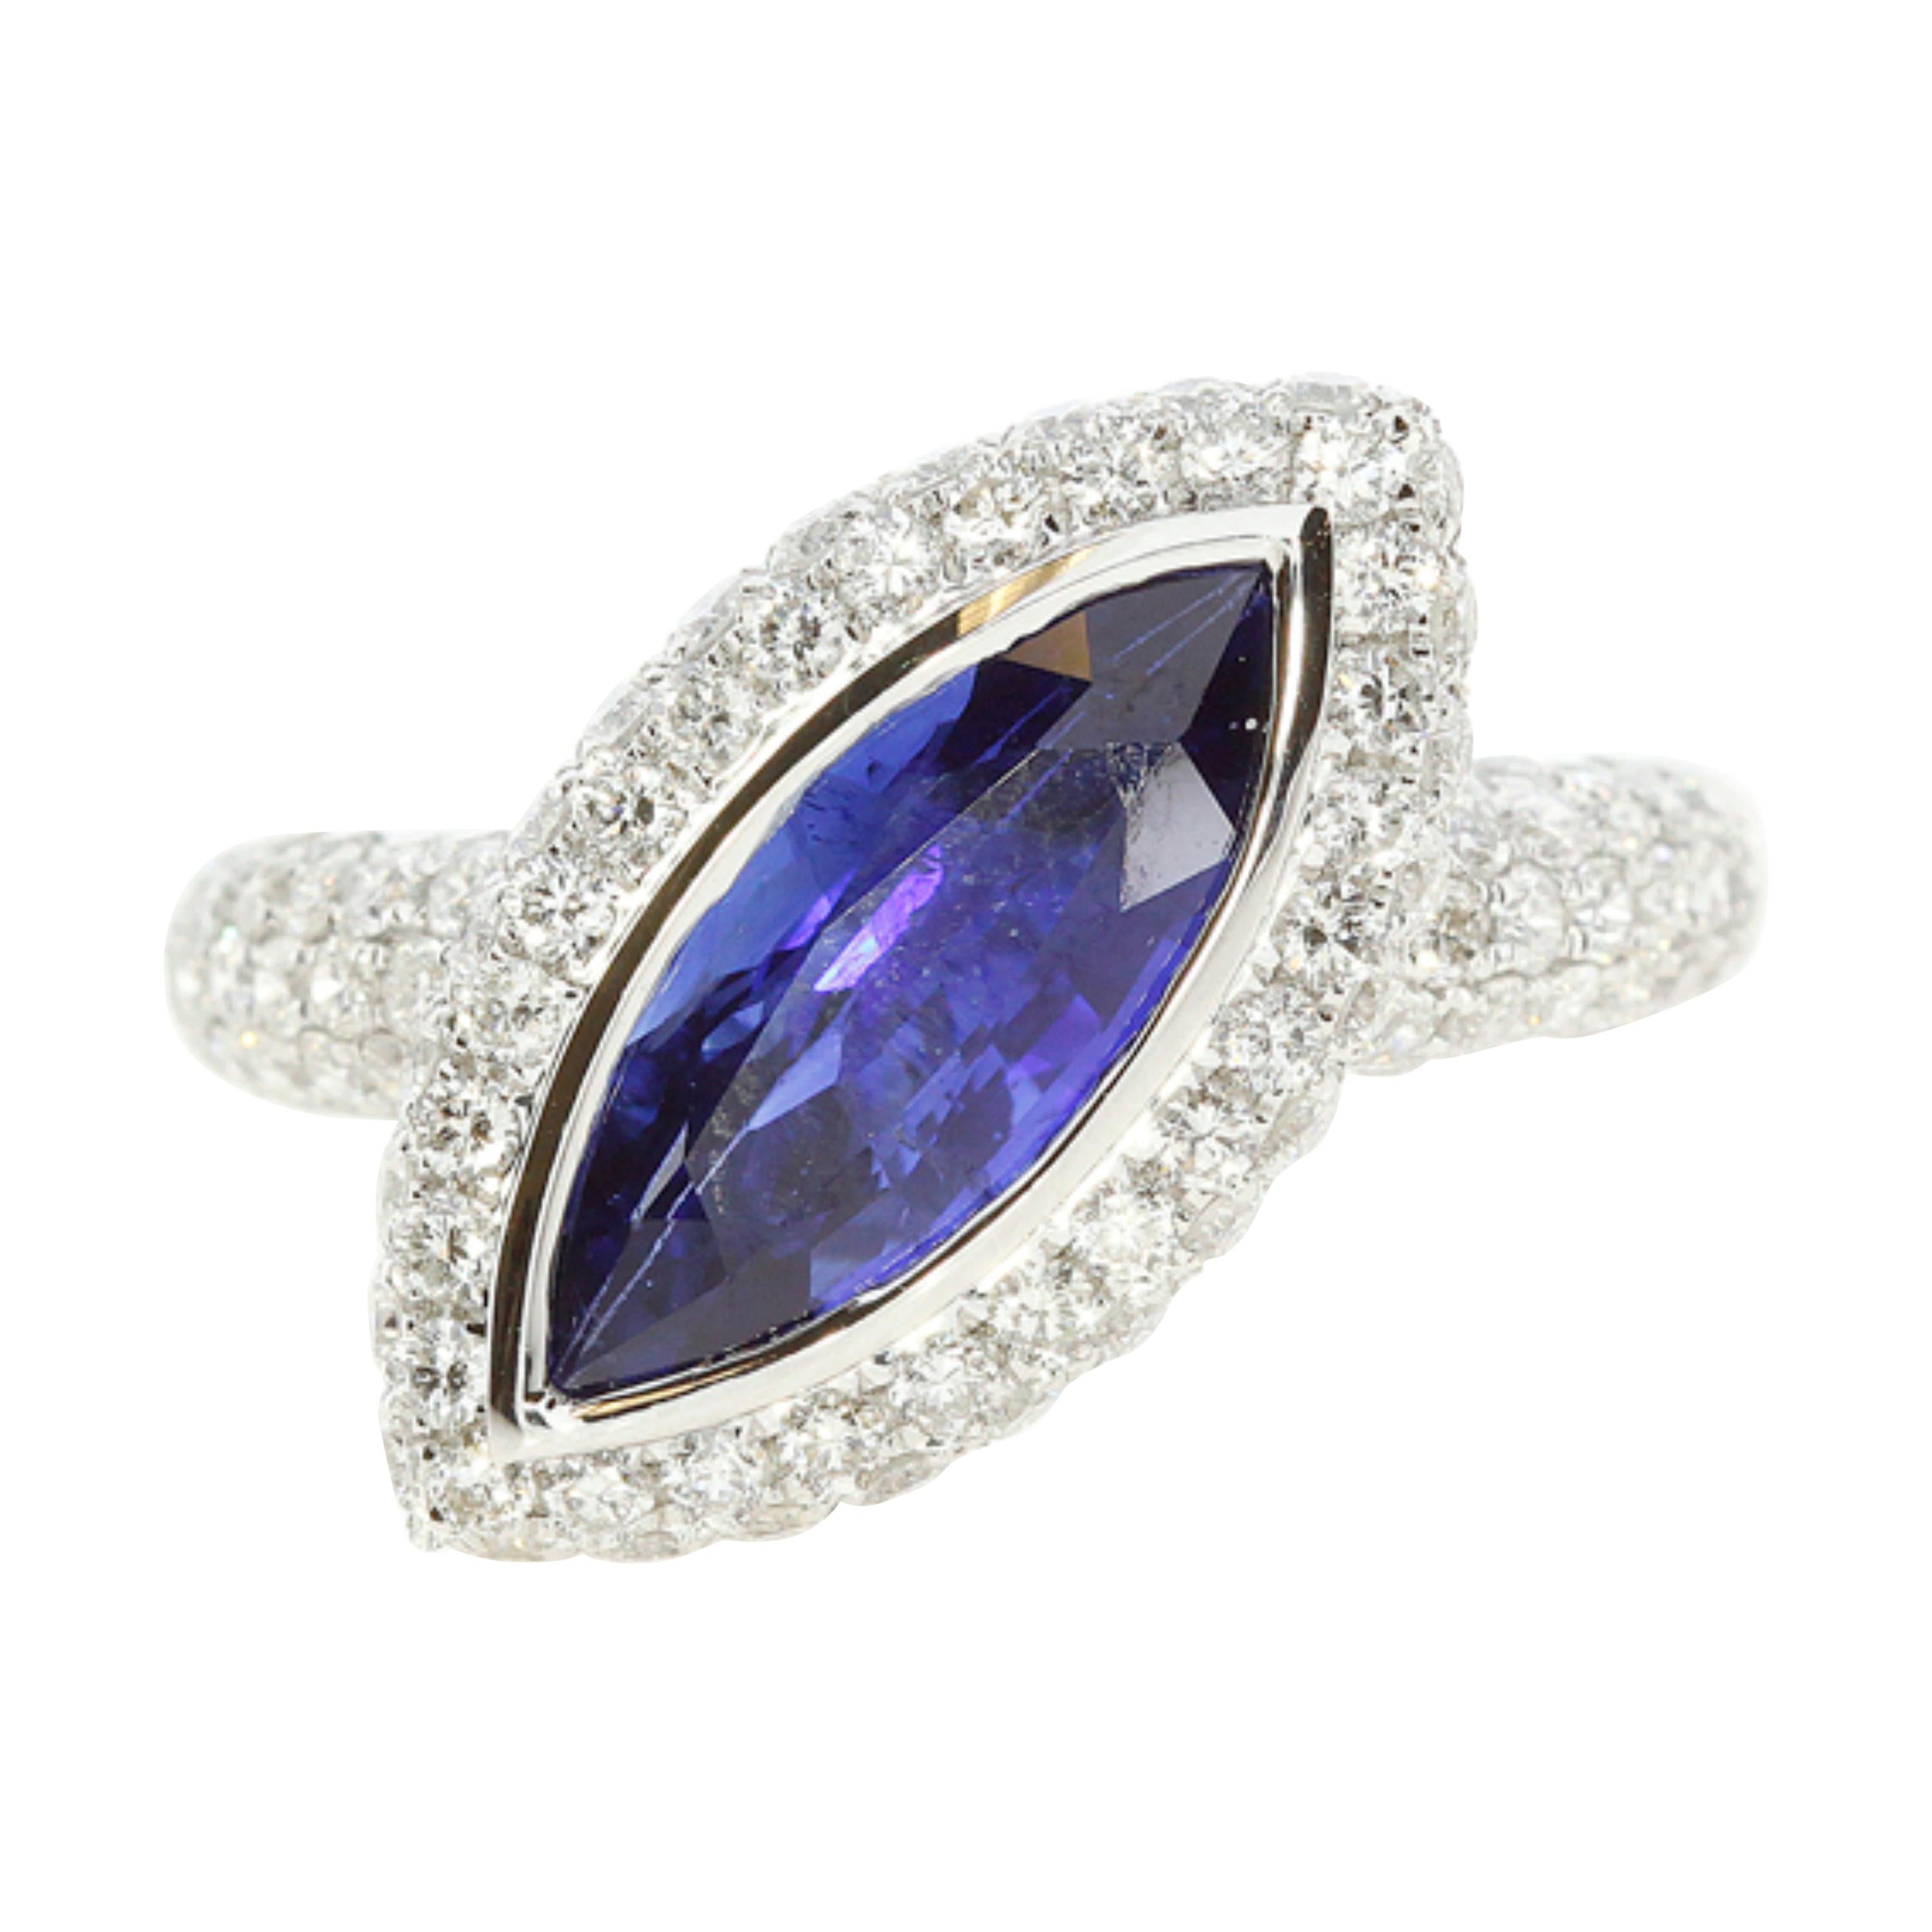 3.5 Carat Blue Sapphire Marquise Ring with White Diamonds